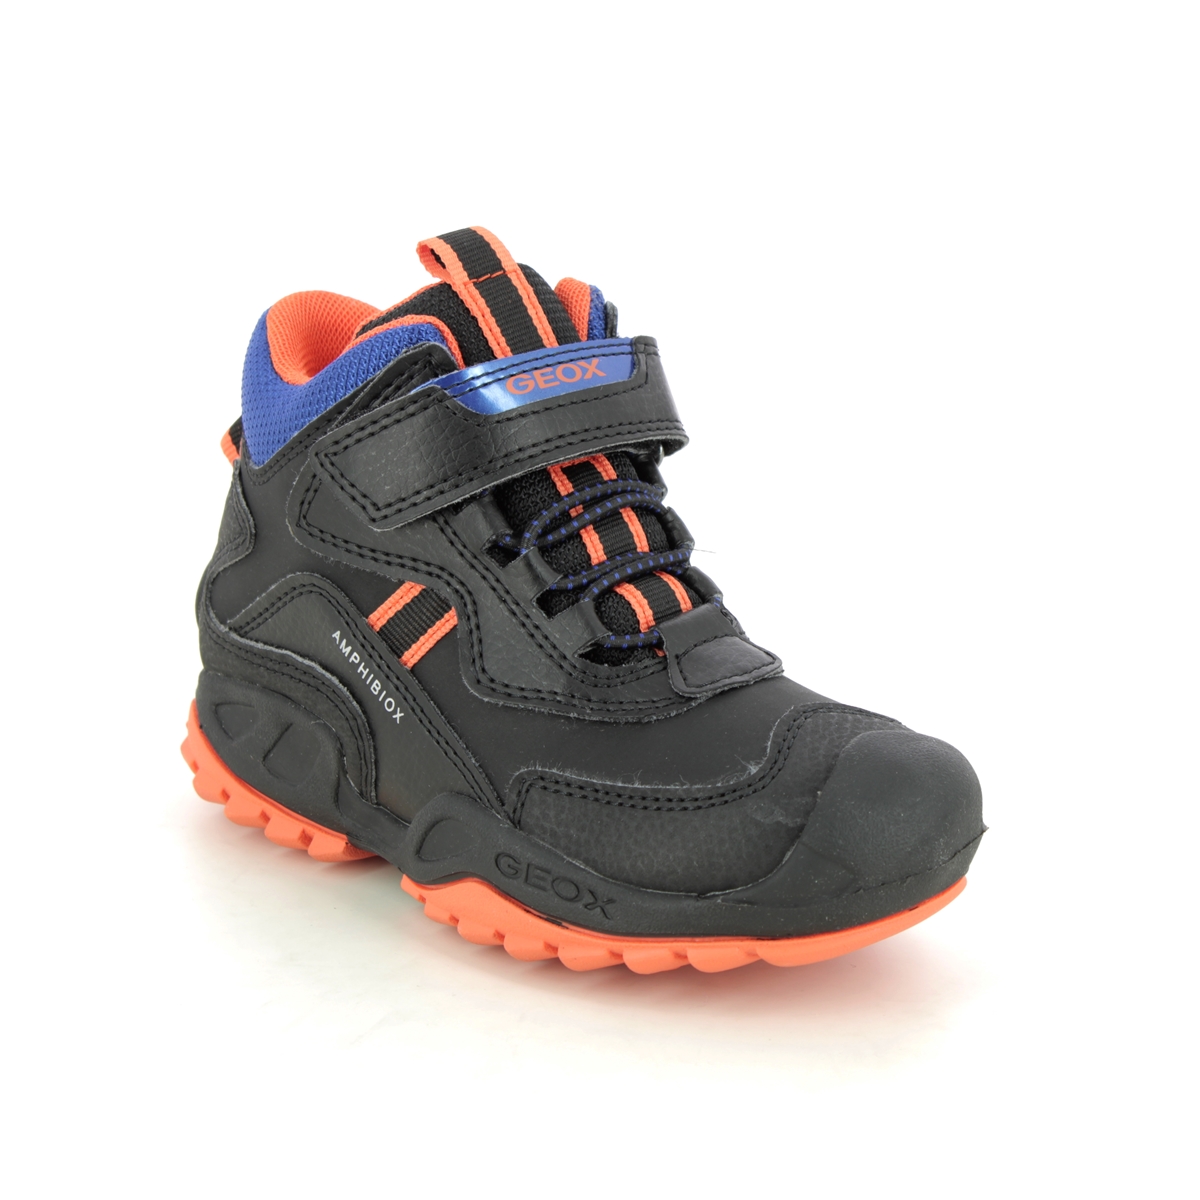 Geox - Savage Boot Tex (Black) J261Wb-C0399 In Size 30 In Plain Black For School For kids